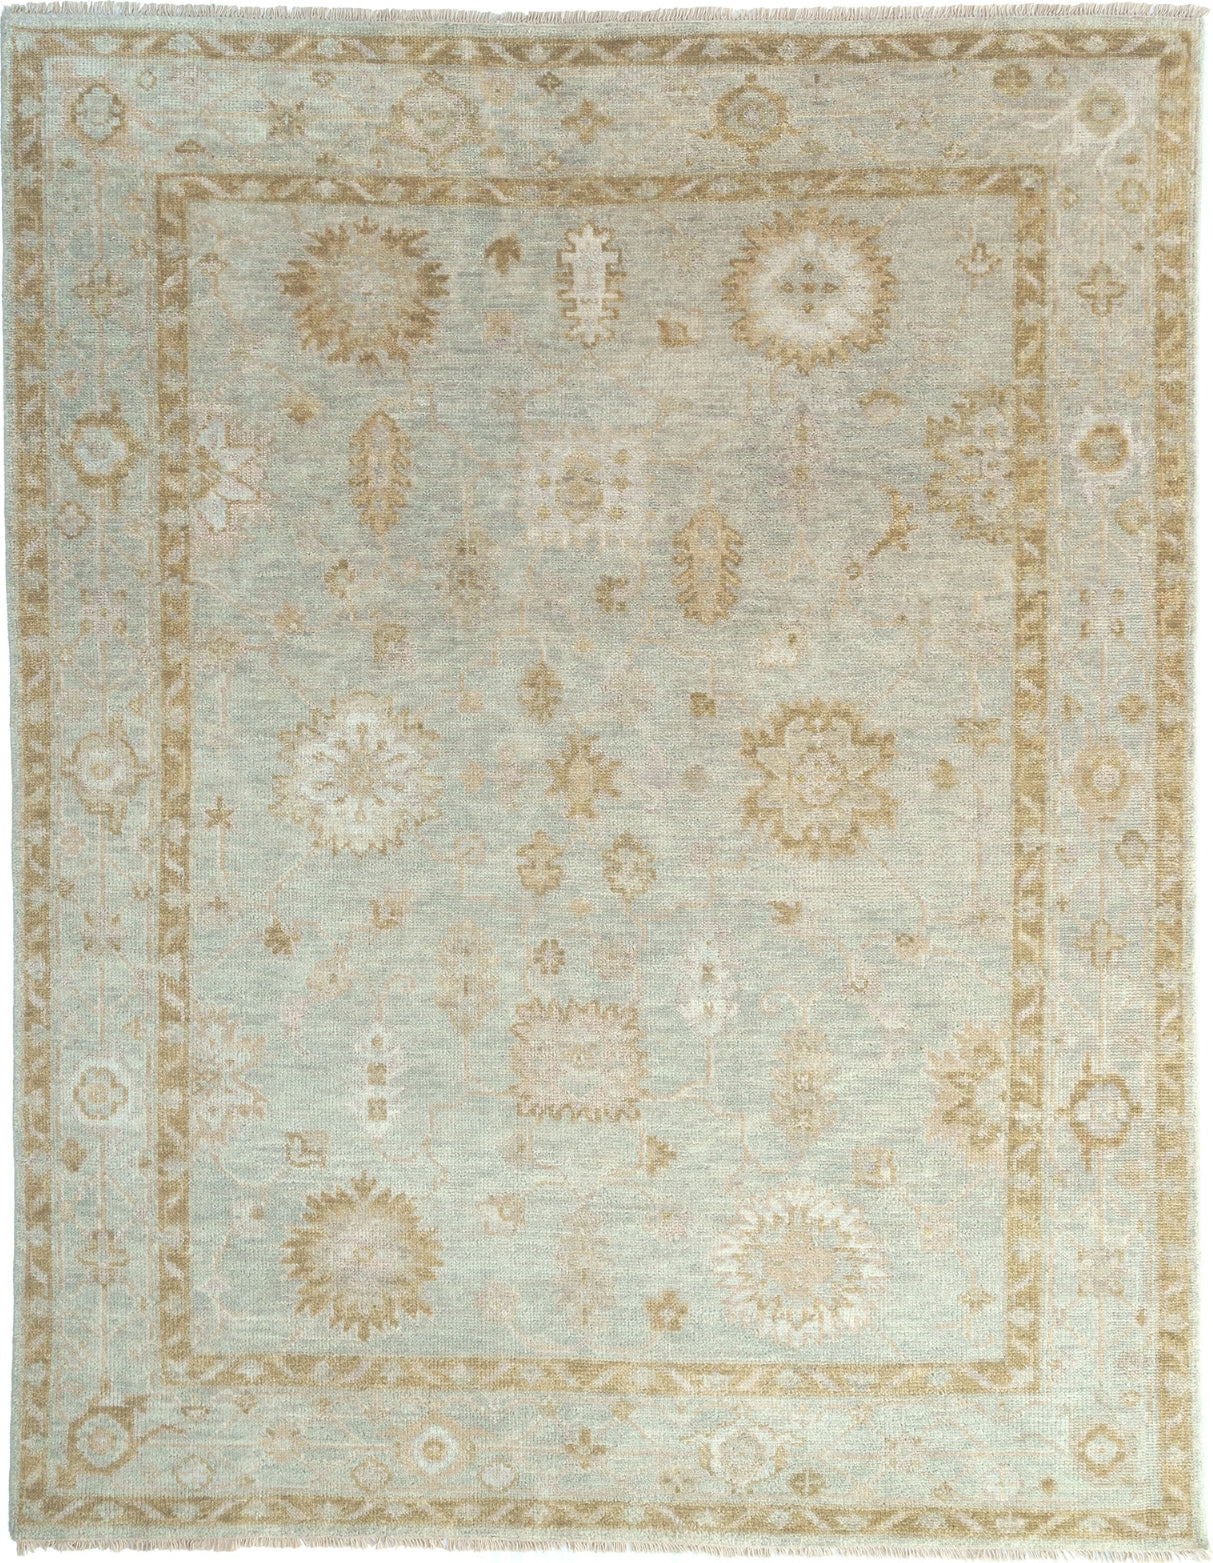 Capel Wentworth-Sutton 1228 Fawn Area Rug main image